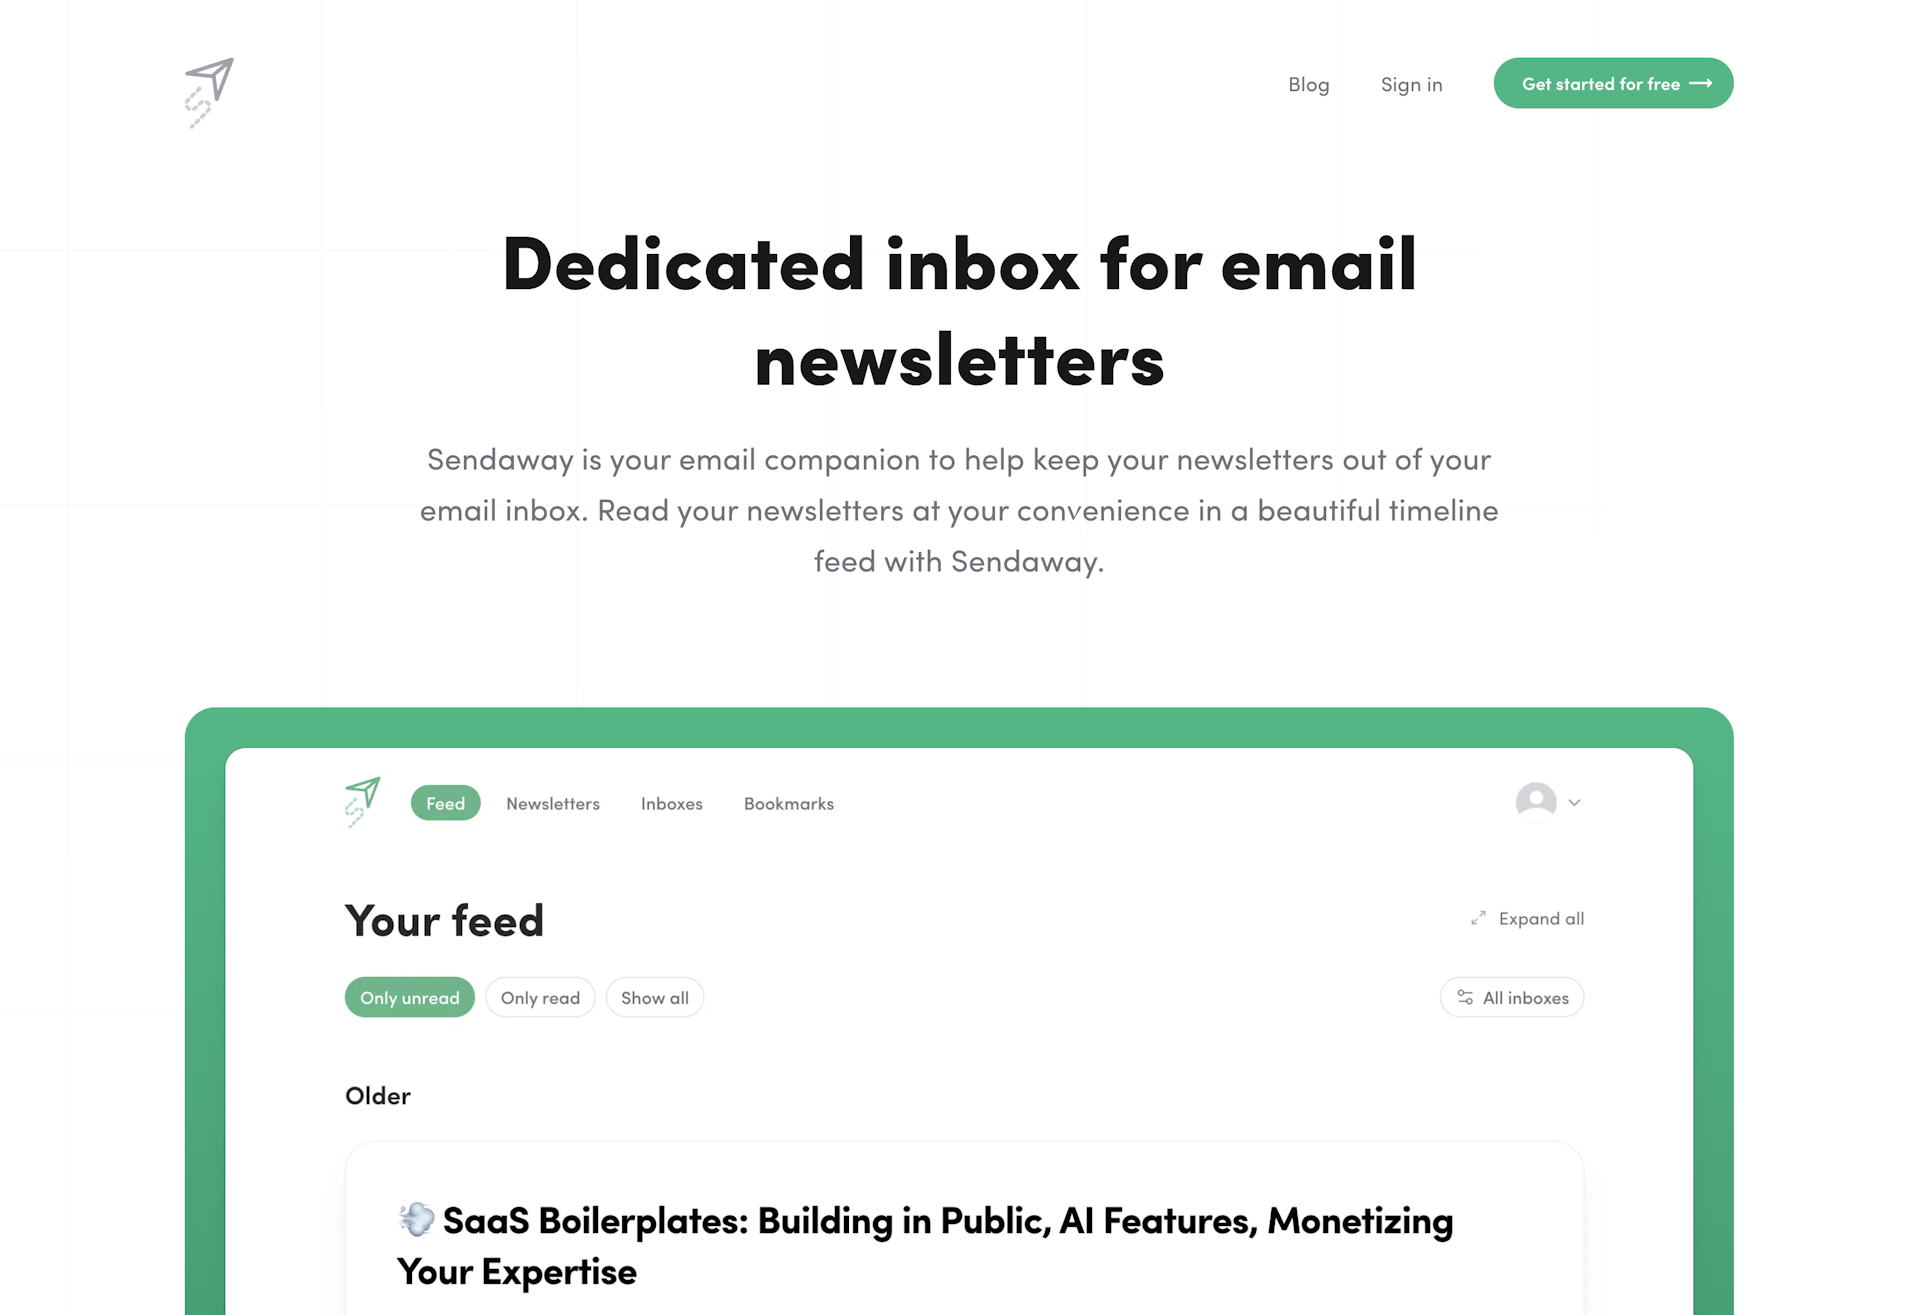 Sendaway: Dedicated inbox for your email newsletters